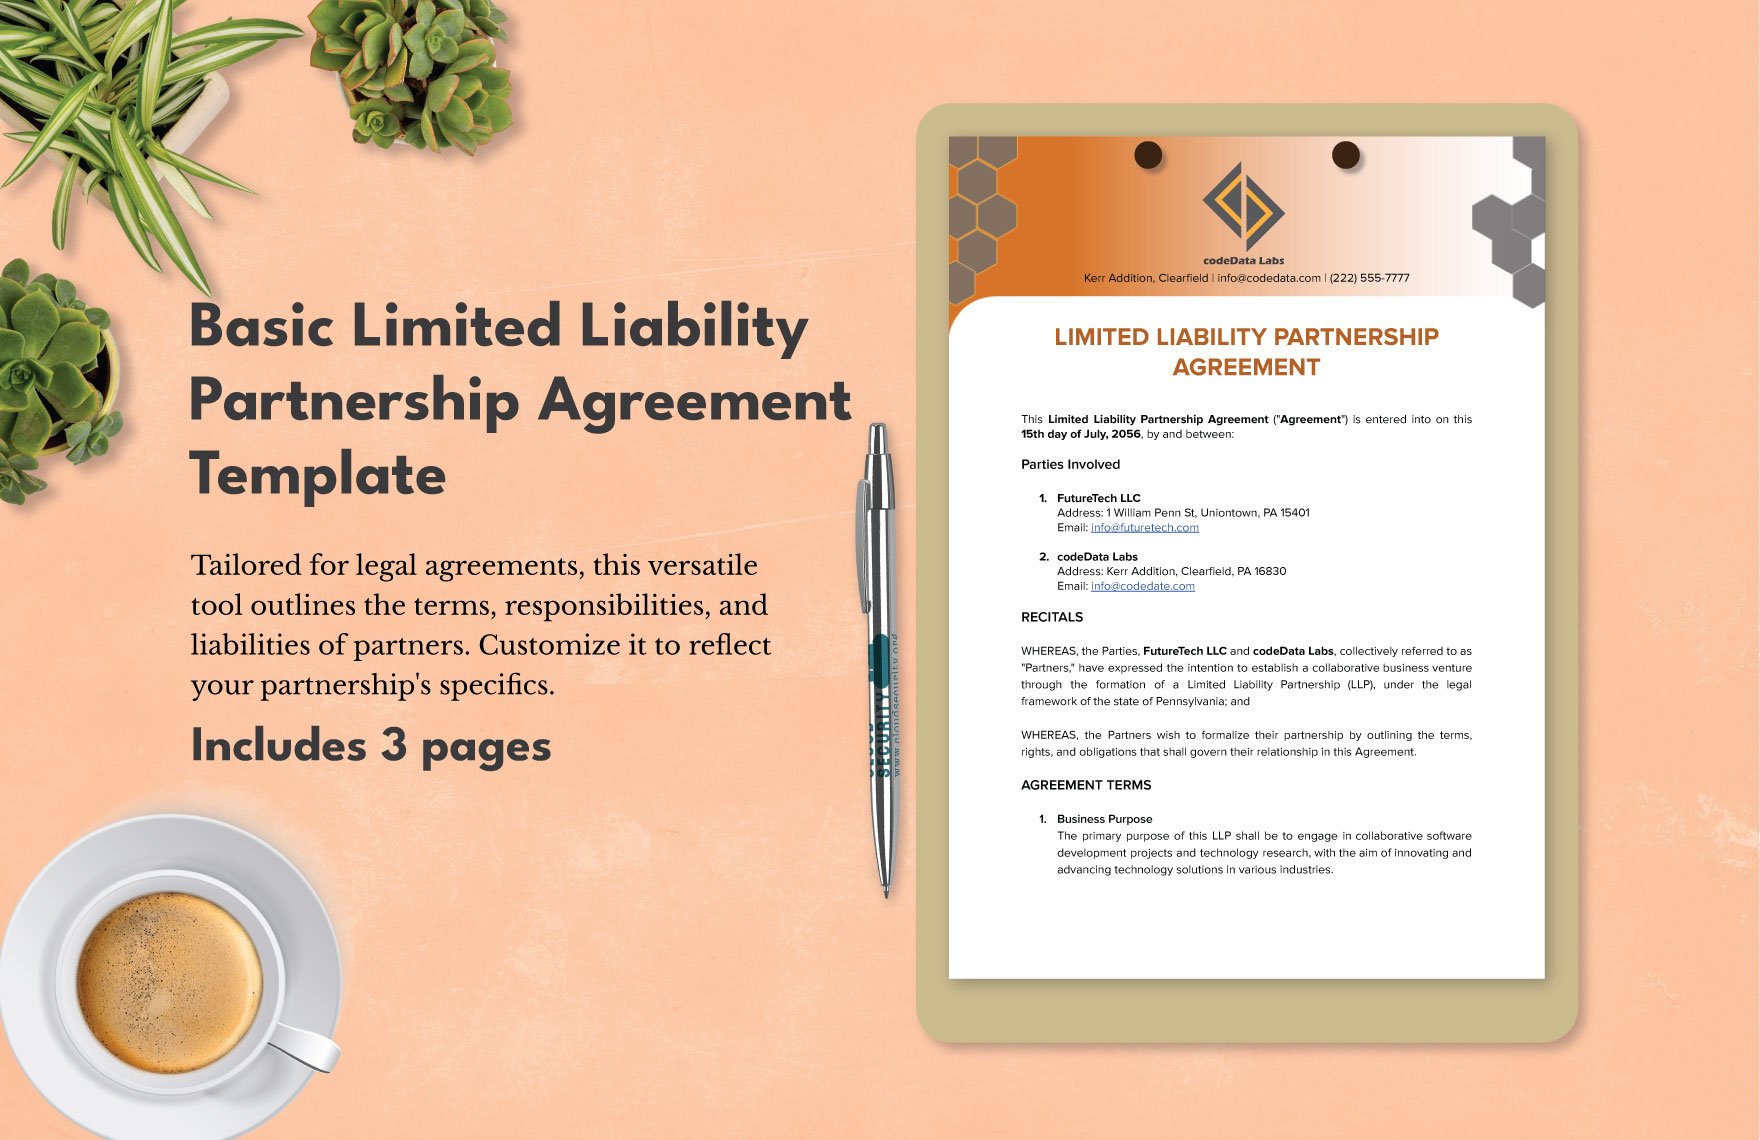 Basic Limited Liability Partnership Agreement Template